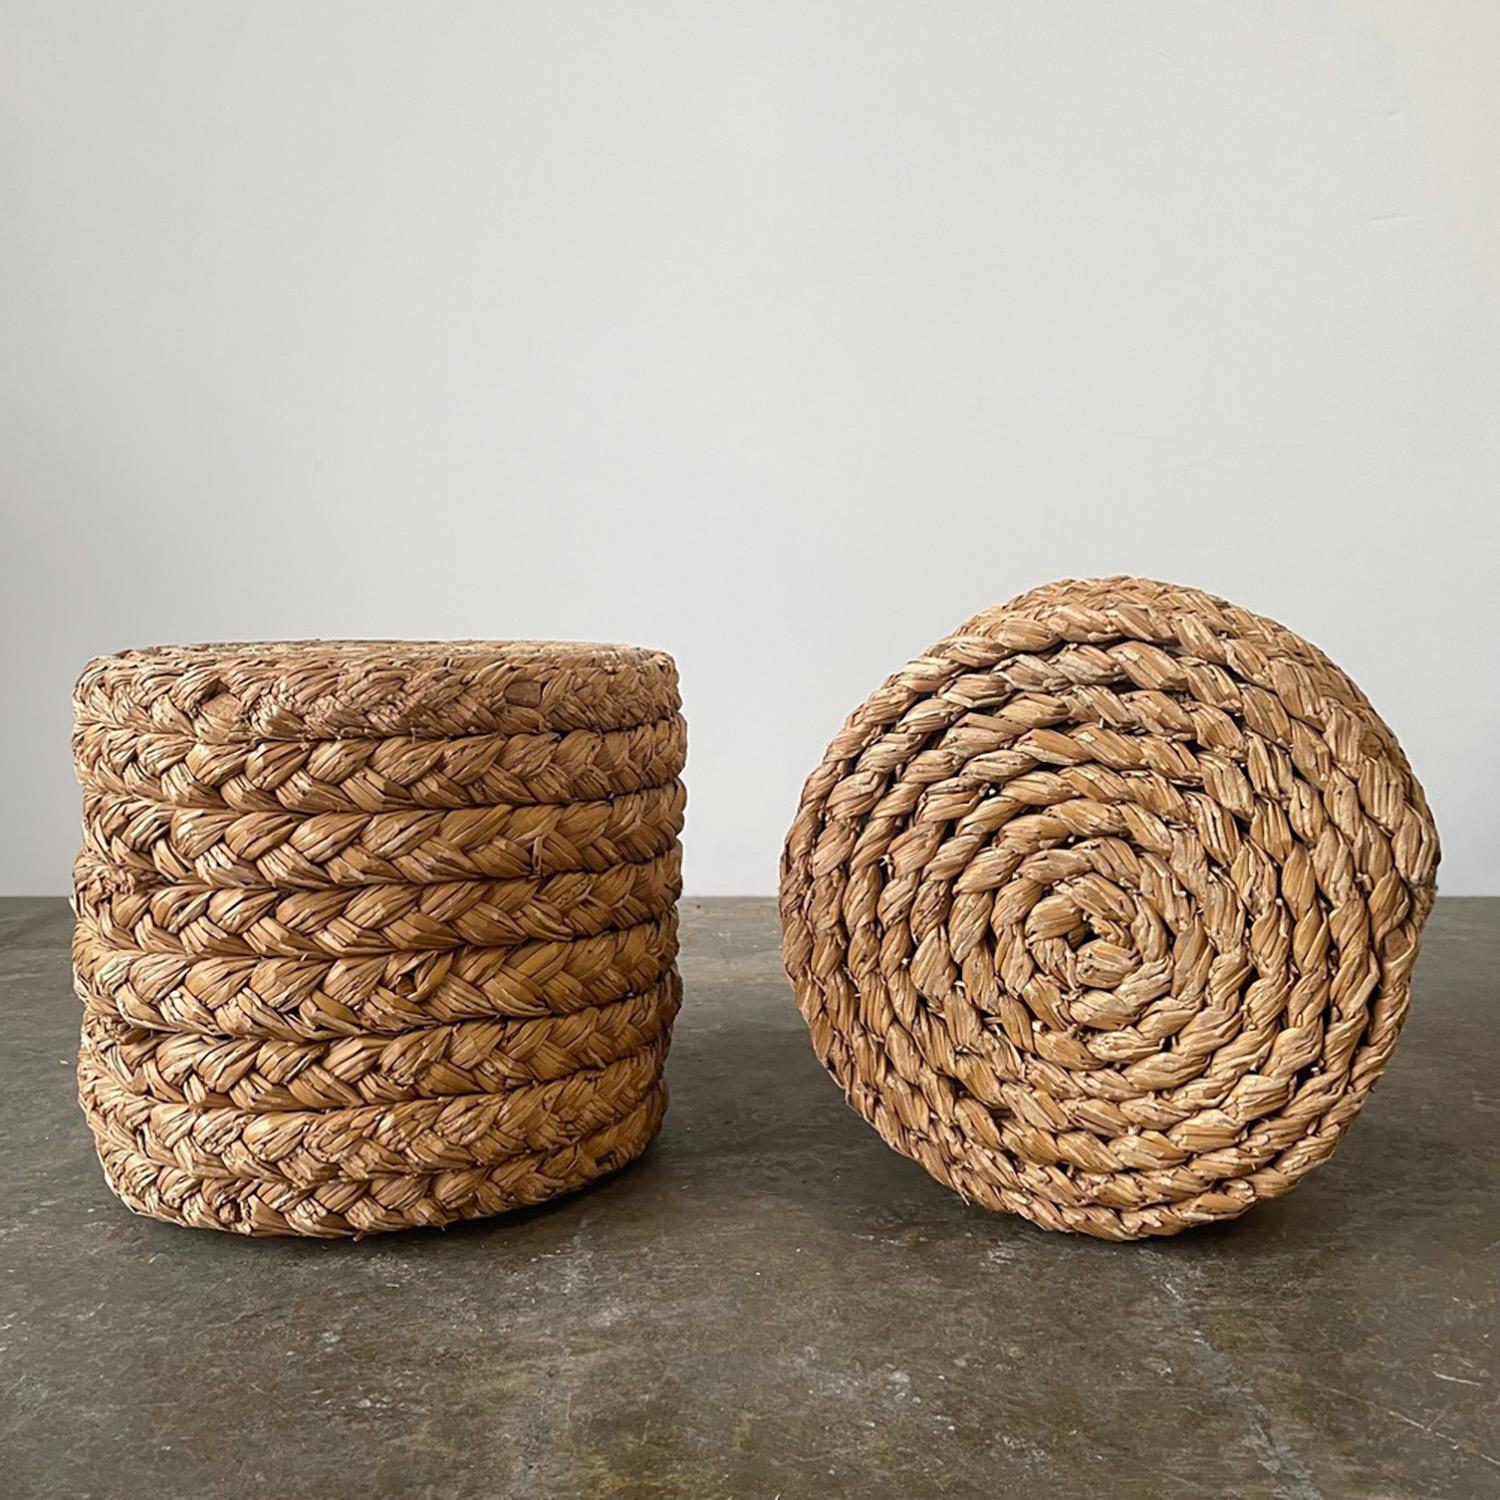 Adrien Audoux & Frida Minet rope stool
France, circa 1950s
Braided seagrass is carefully coiled around a heavyweight base
Secured with aged wooden pegs and finished with metal banding on the ends
Patina from age and use
This listing is for a single